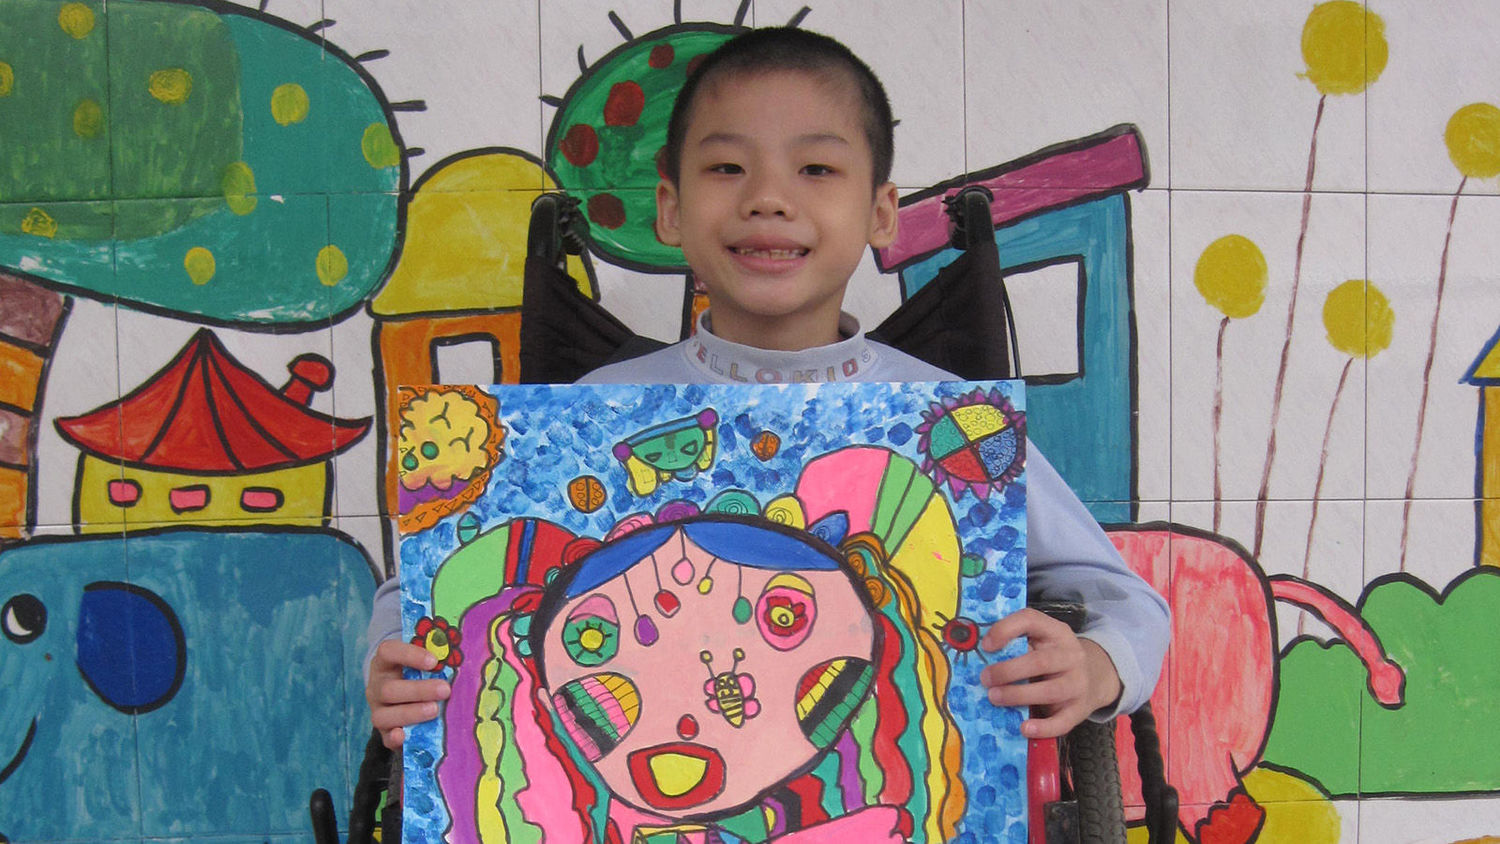 Wu Zhenhao at 8. Zhenhao, whose art training was funded by OneSky, was orphaned as an infant and joined OneSky’s programs at the age of four months.